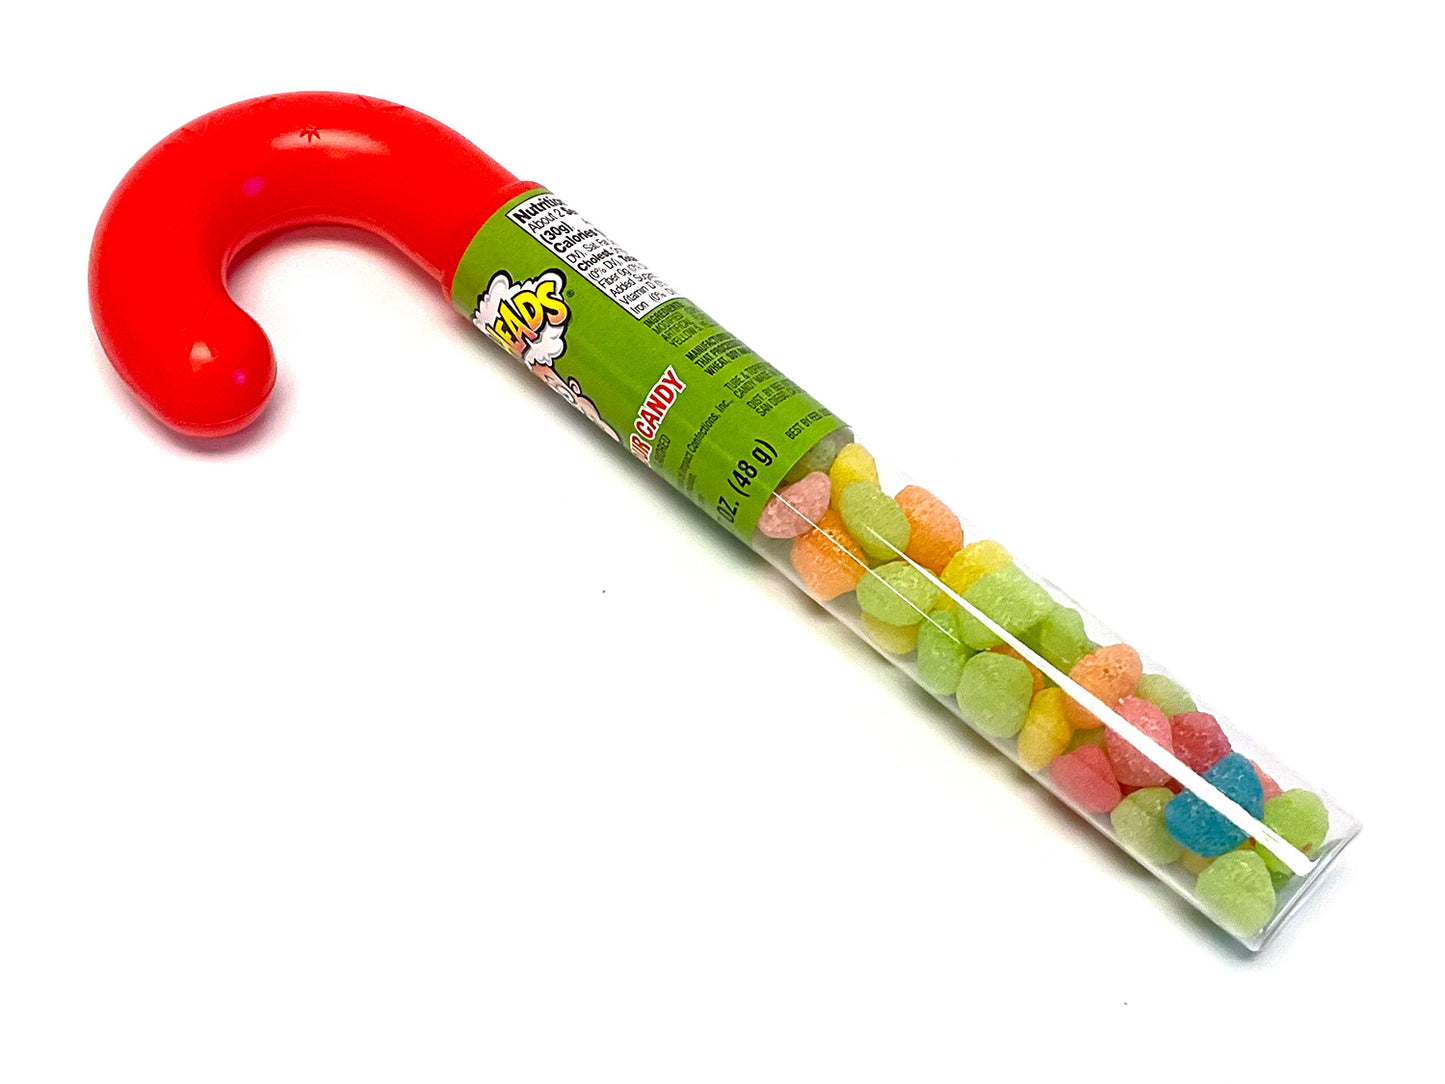 Candy Cane filled with Warheads Chewy Sours - 1.7oz 9 inch